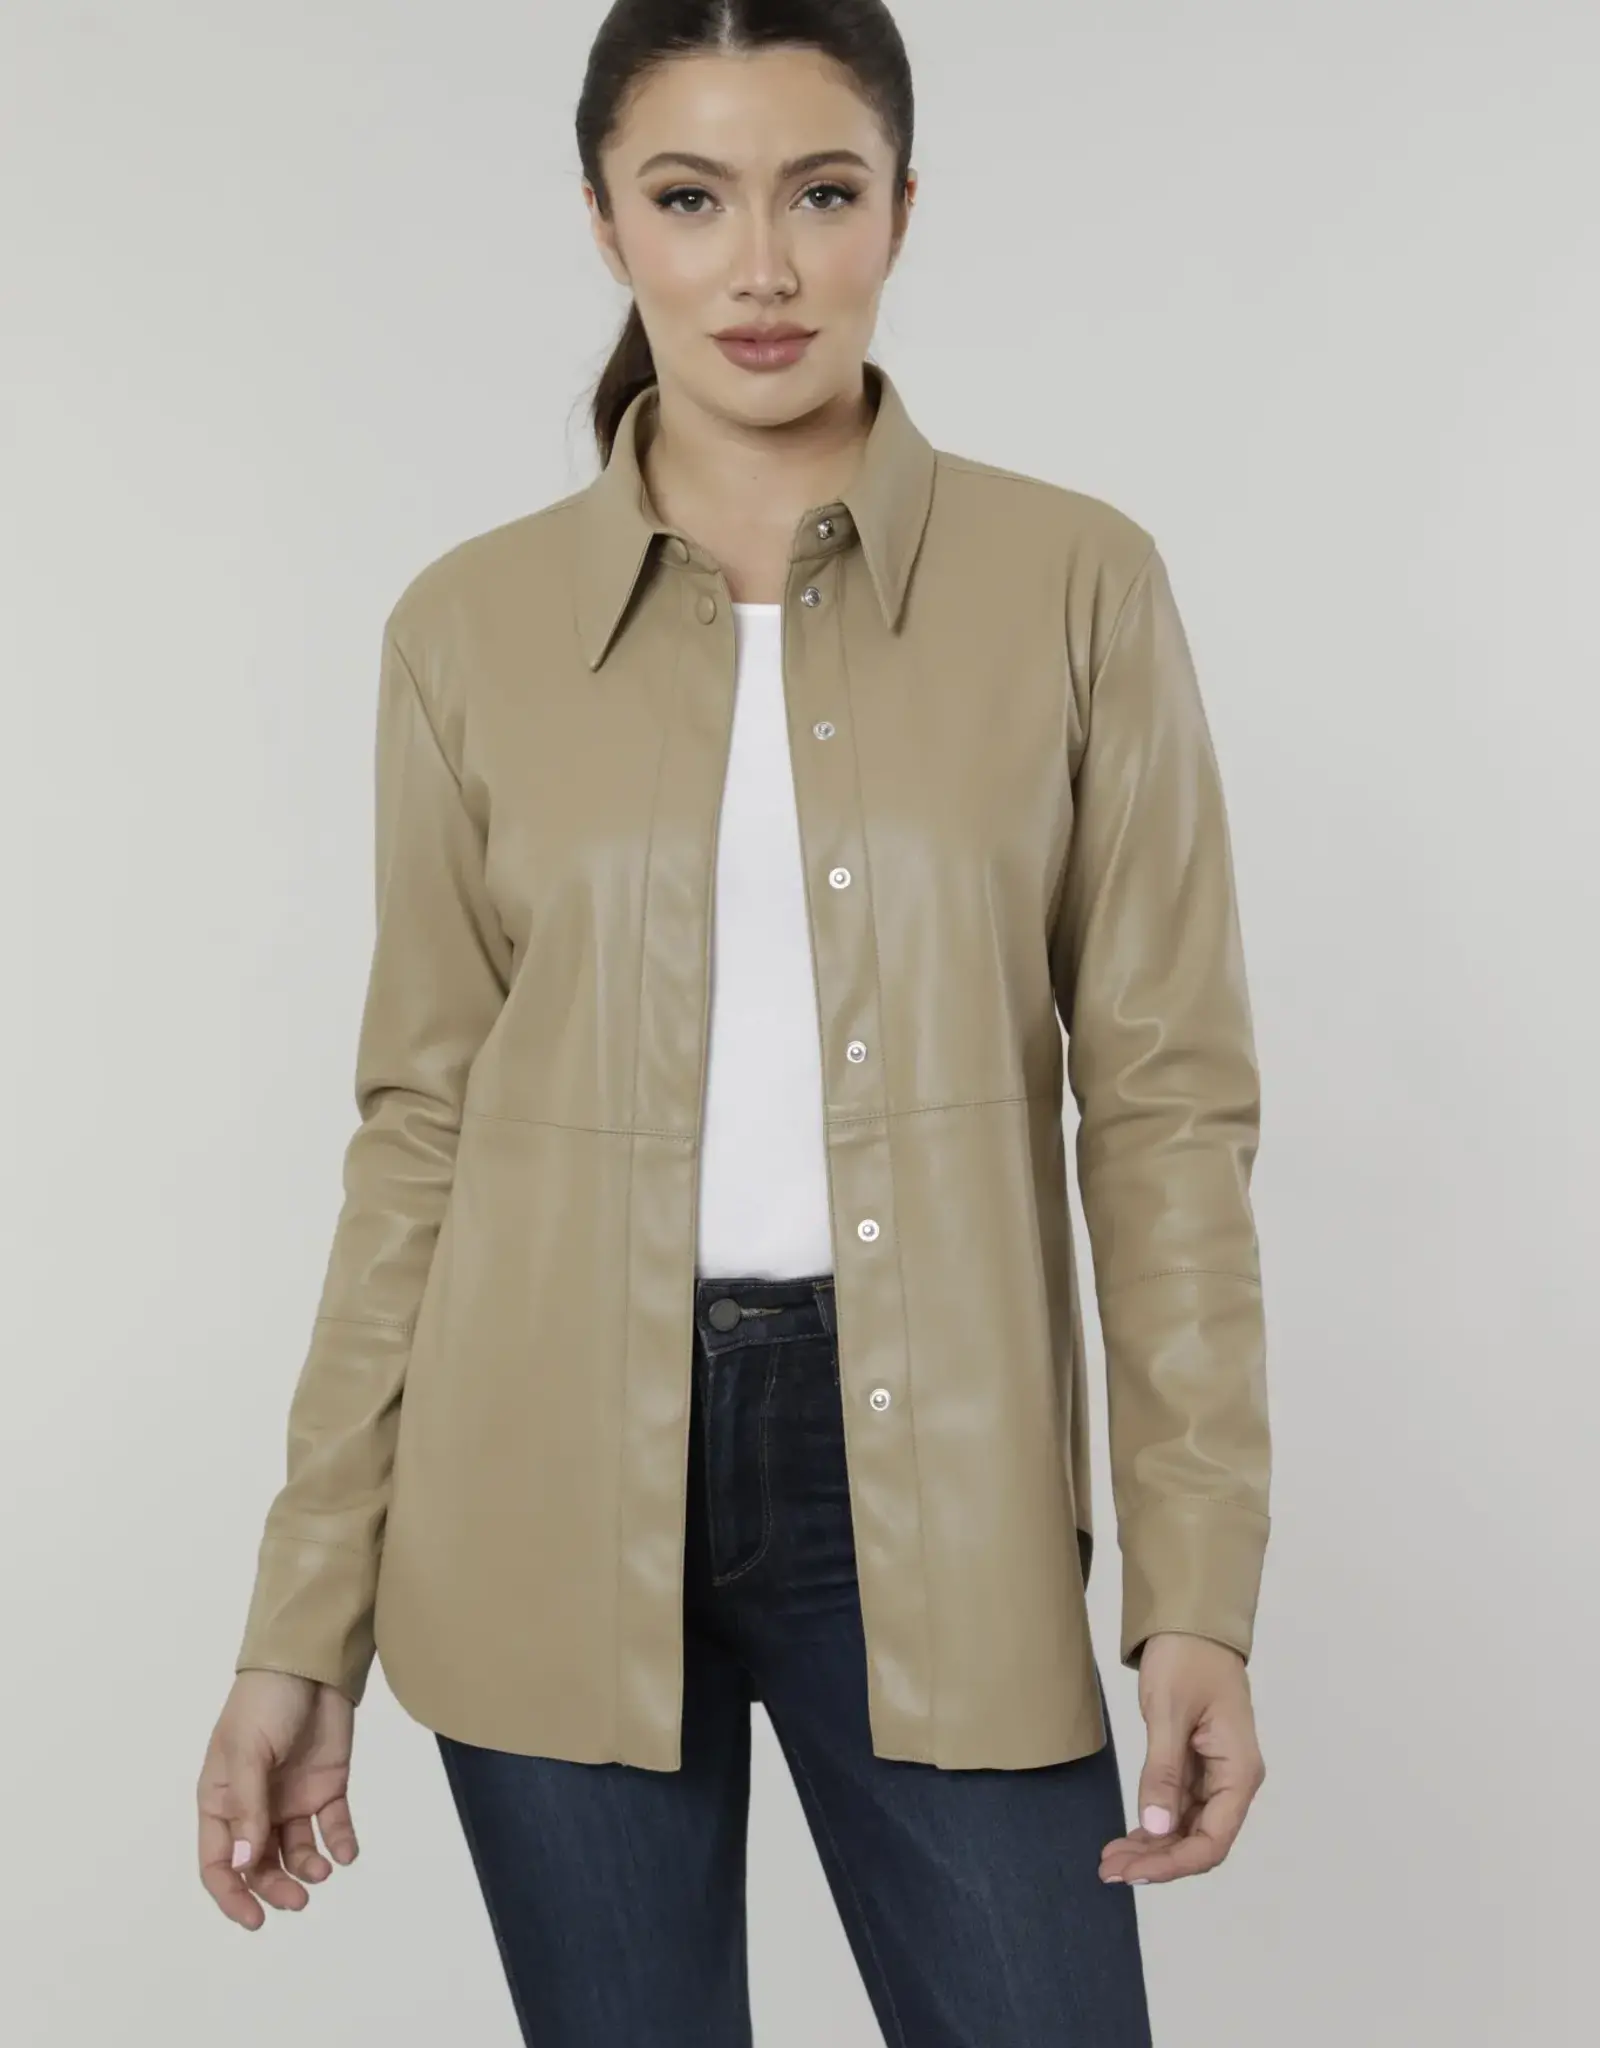 Dolce Cabo Dolce Cabo Vegan Leather Shirt Taupe